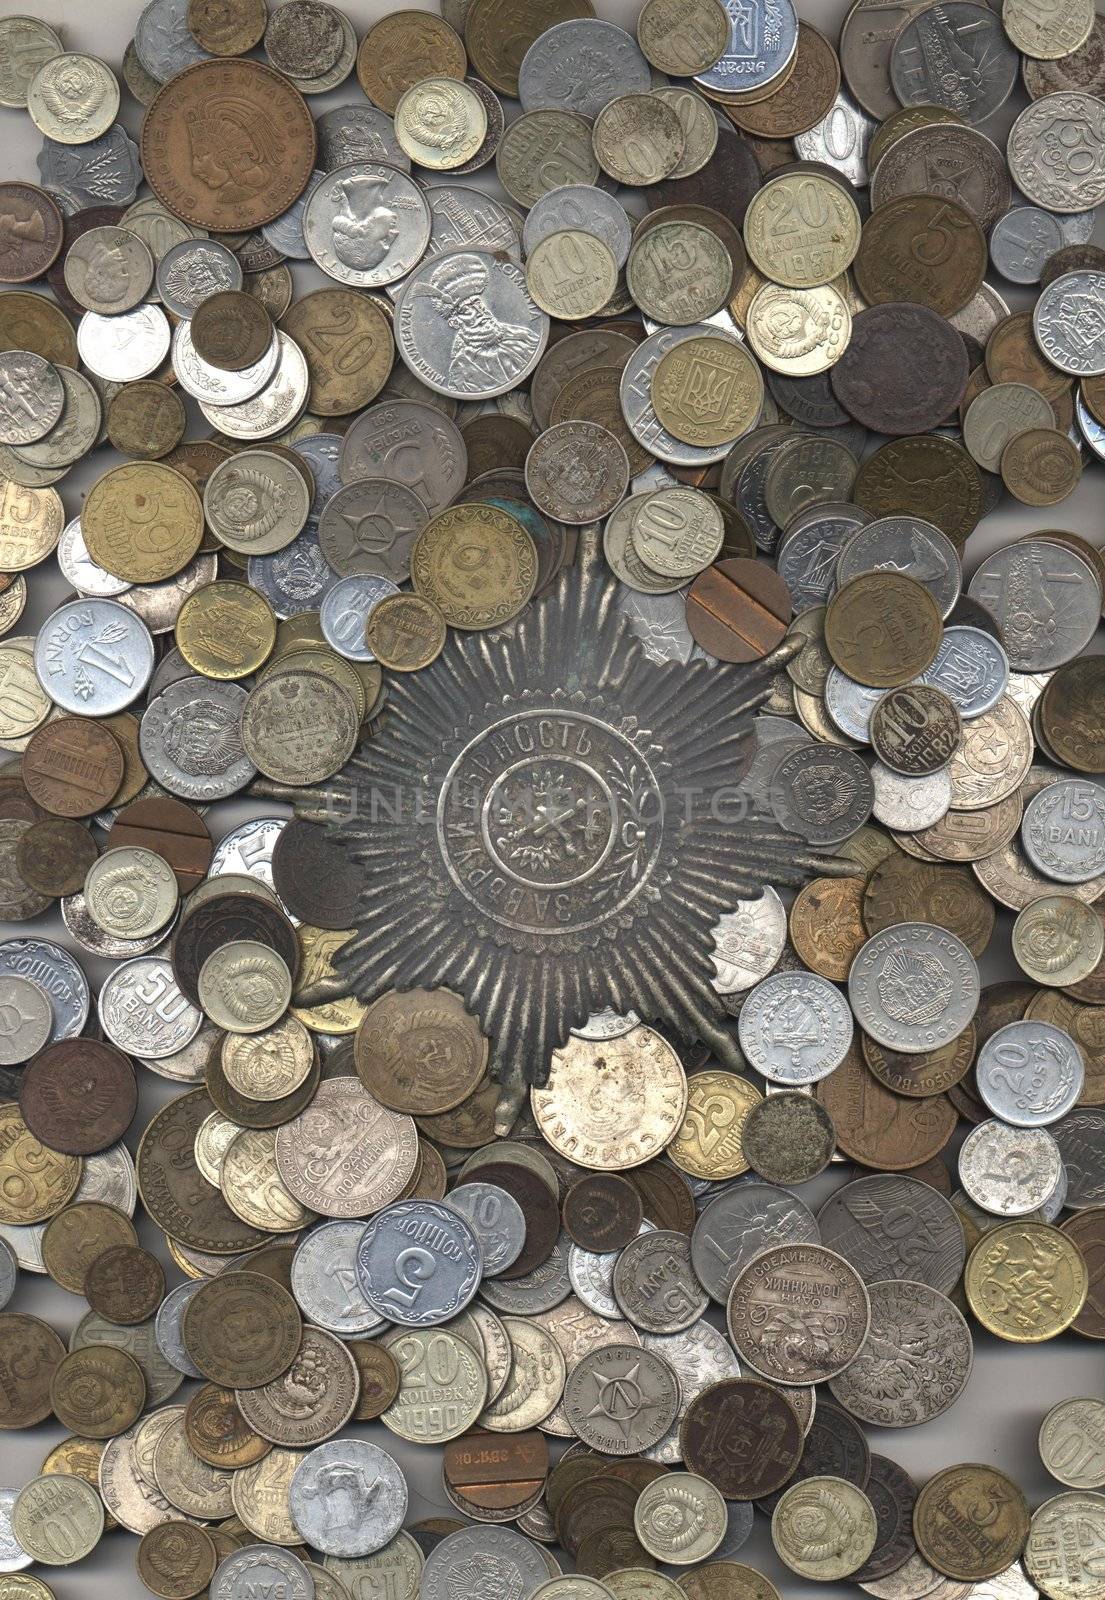 A fine texture of many different coins -silver, copper, aluminium